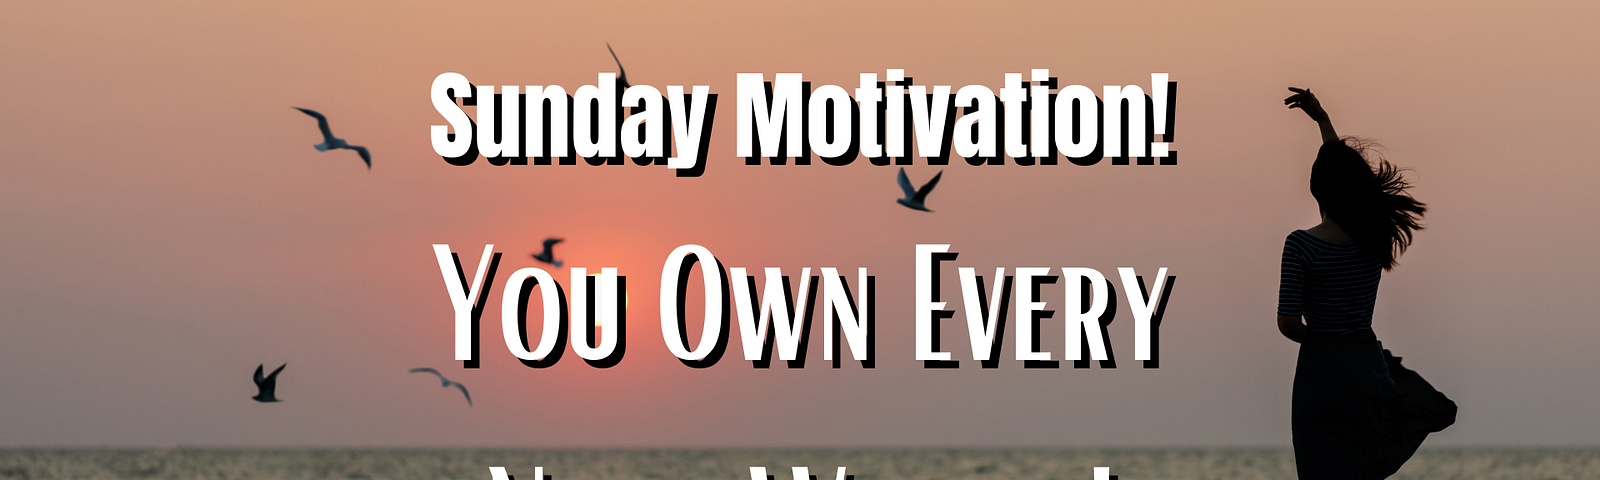 sunday motivation and inspirational messages with youtube videos